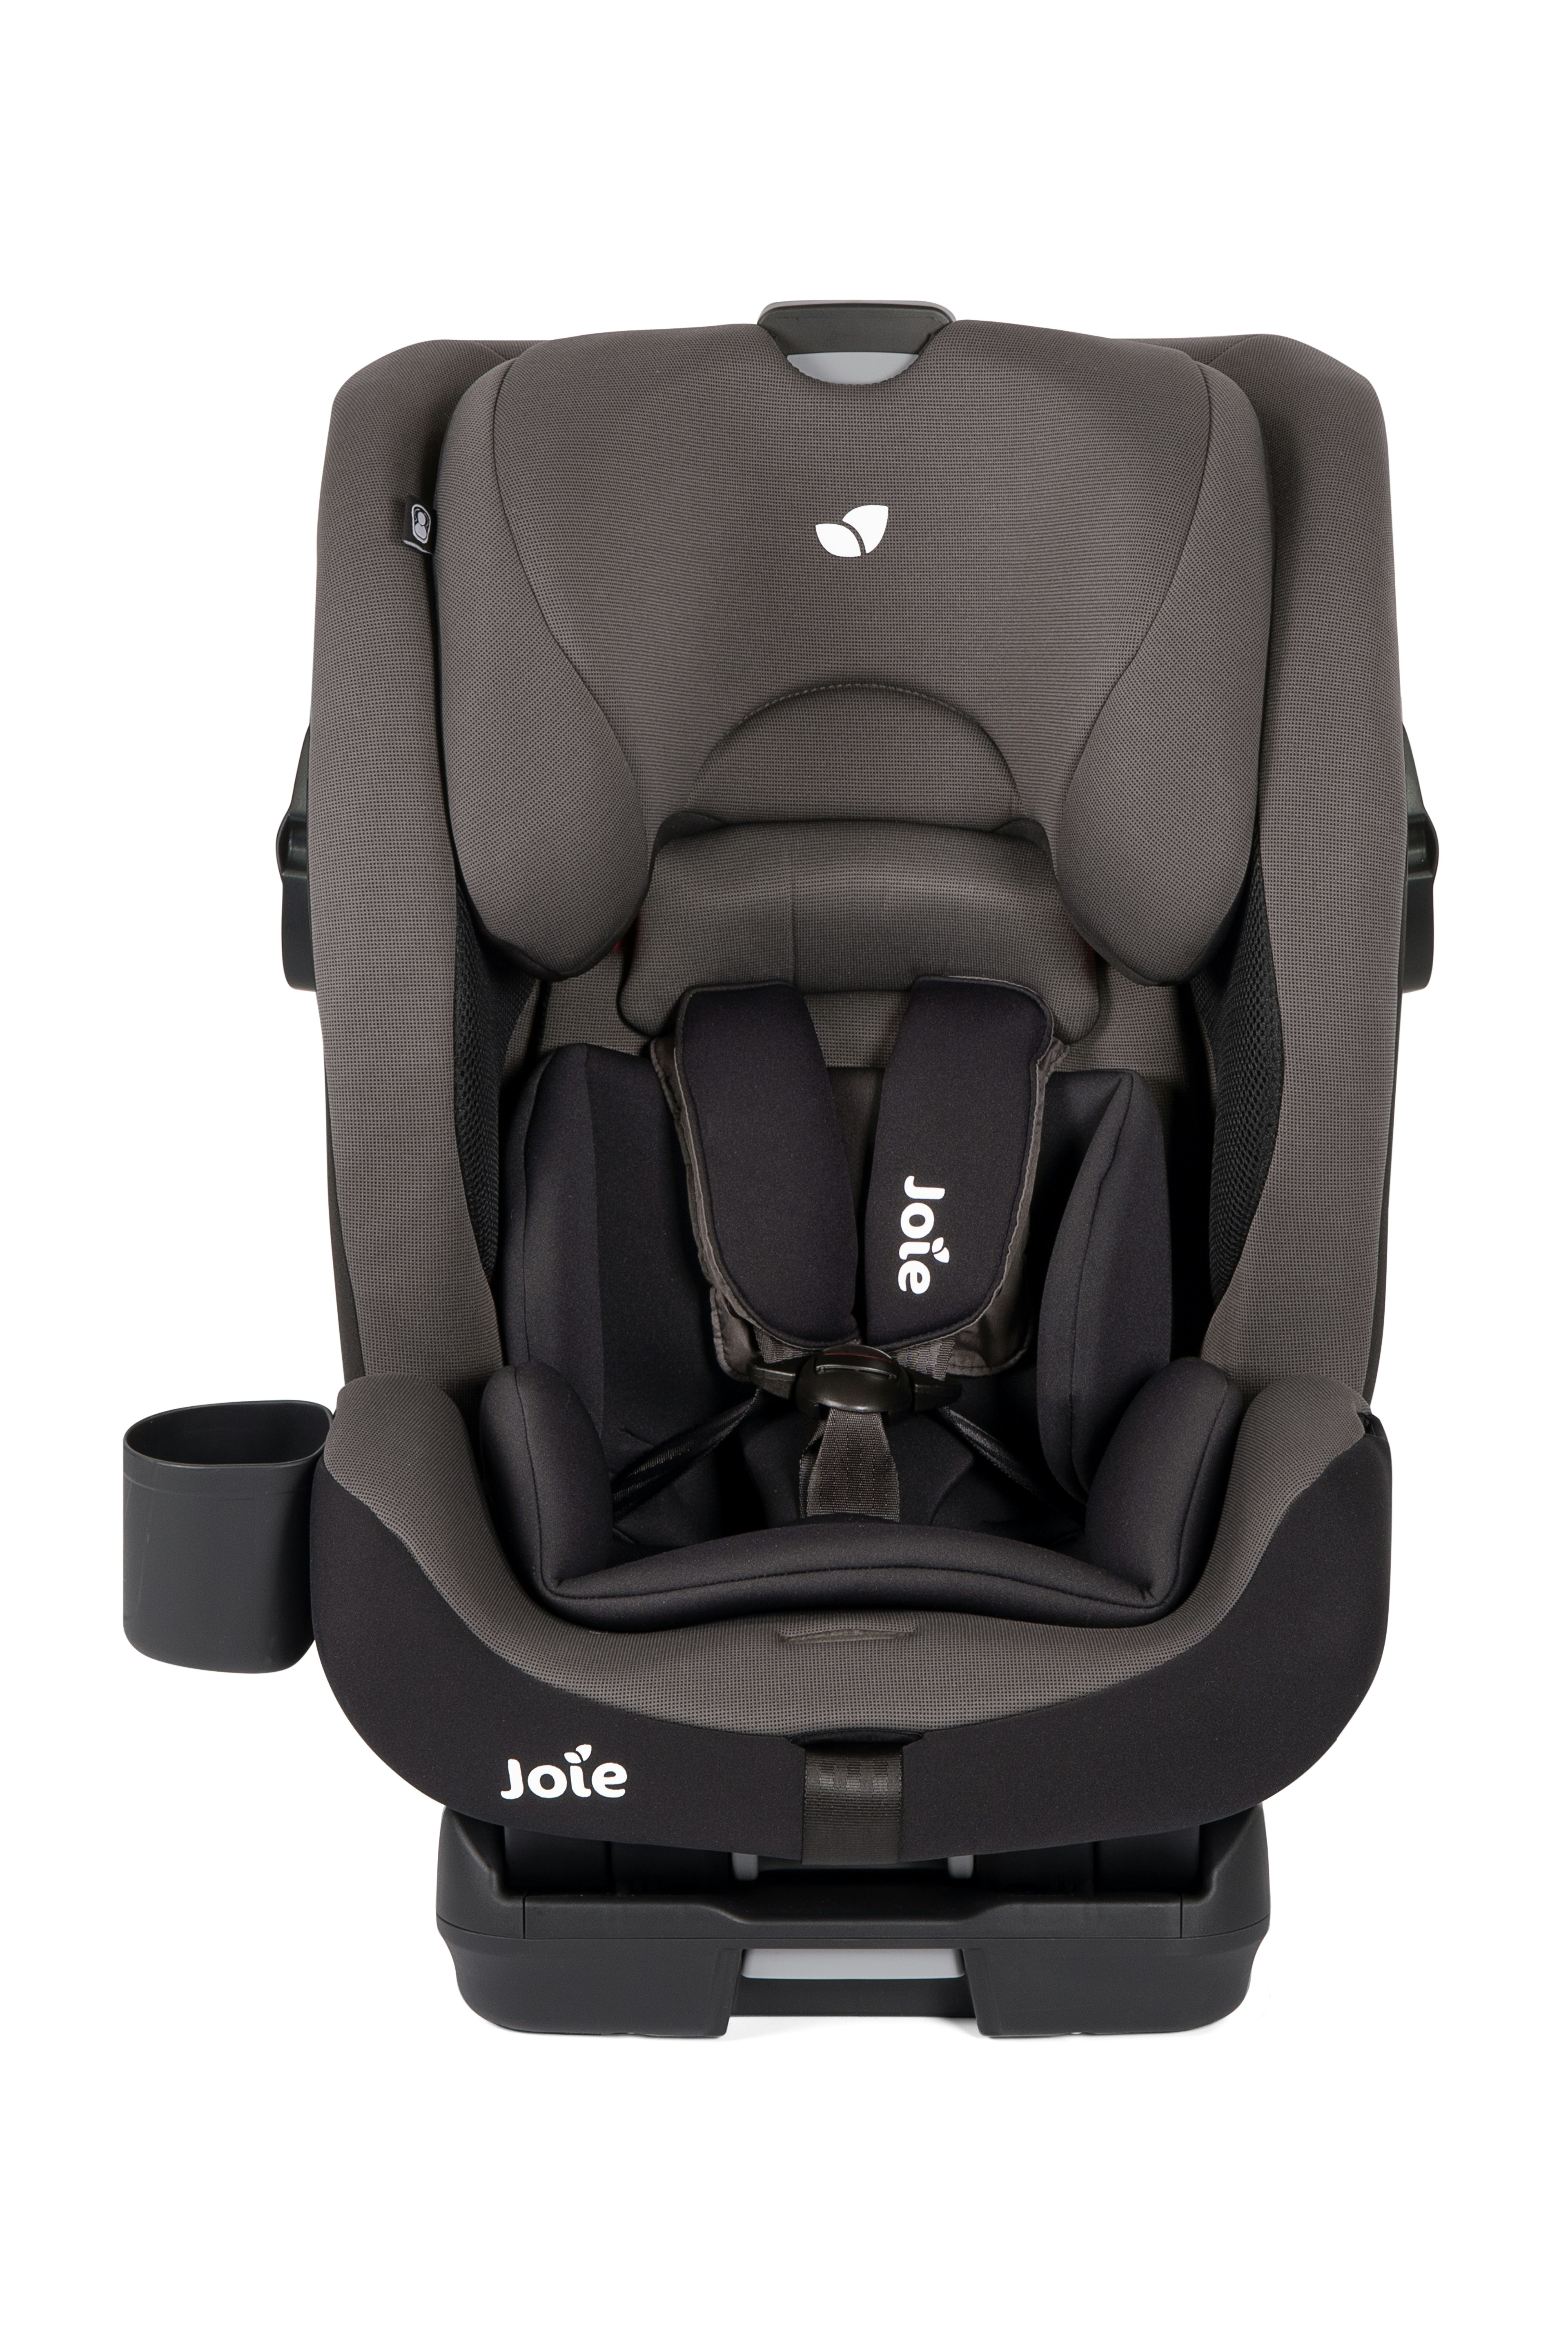 Joie Bold R Combination Booster Car Seat, 1 to 1 Crash Exchange